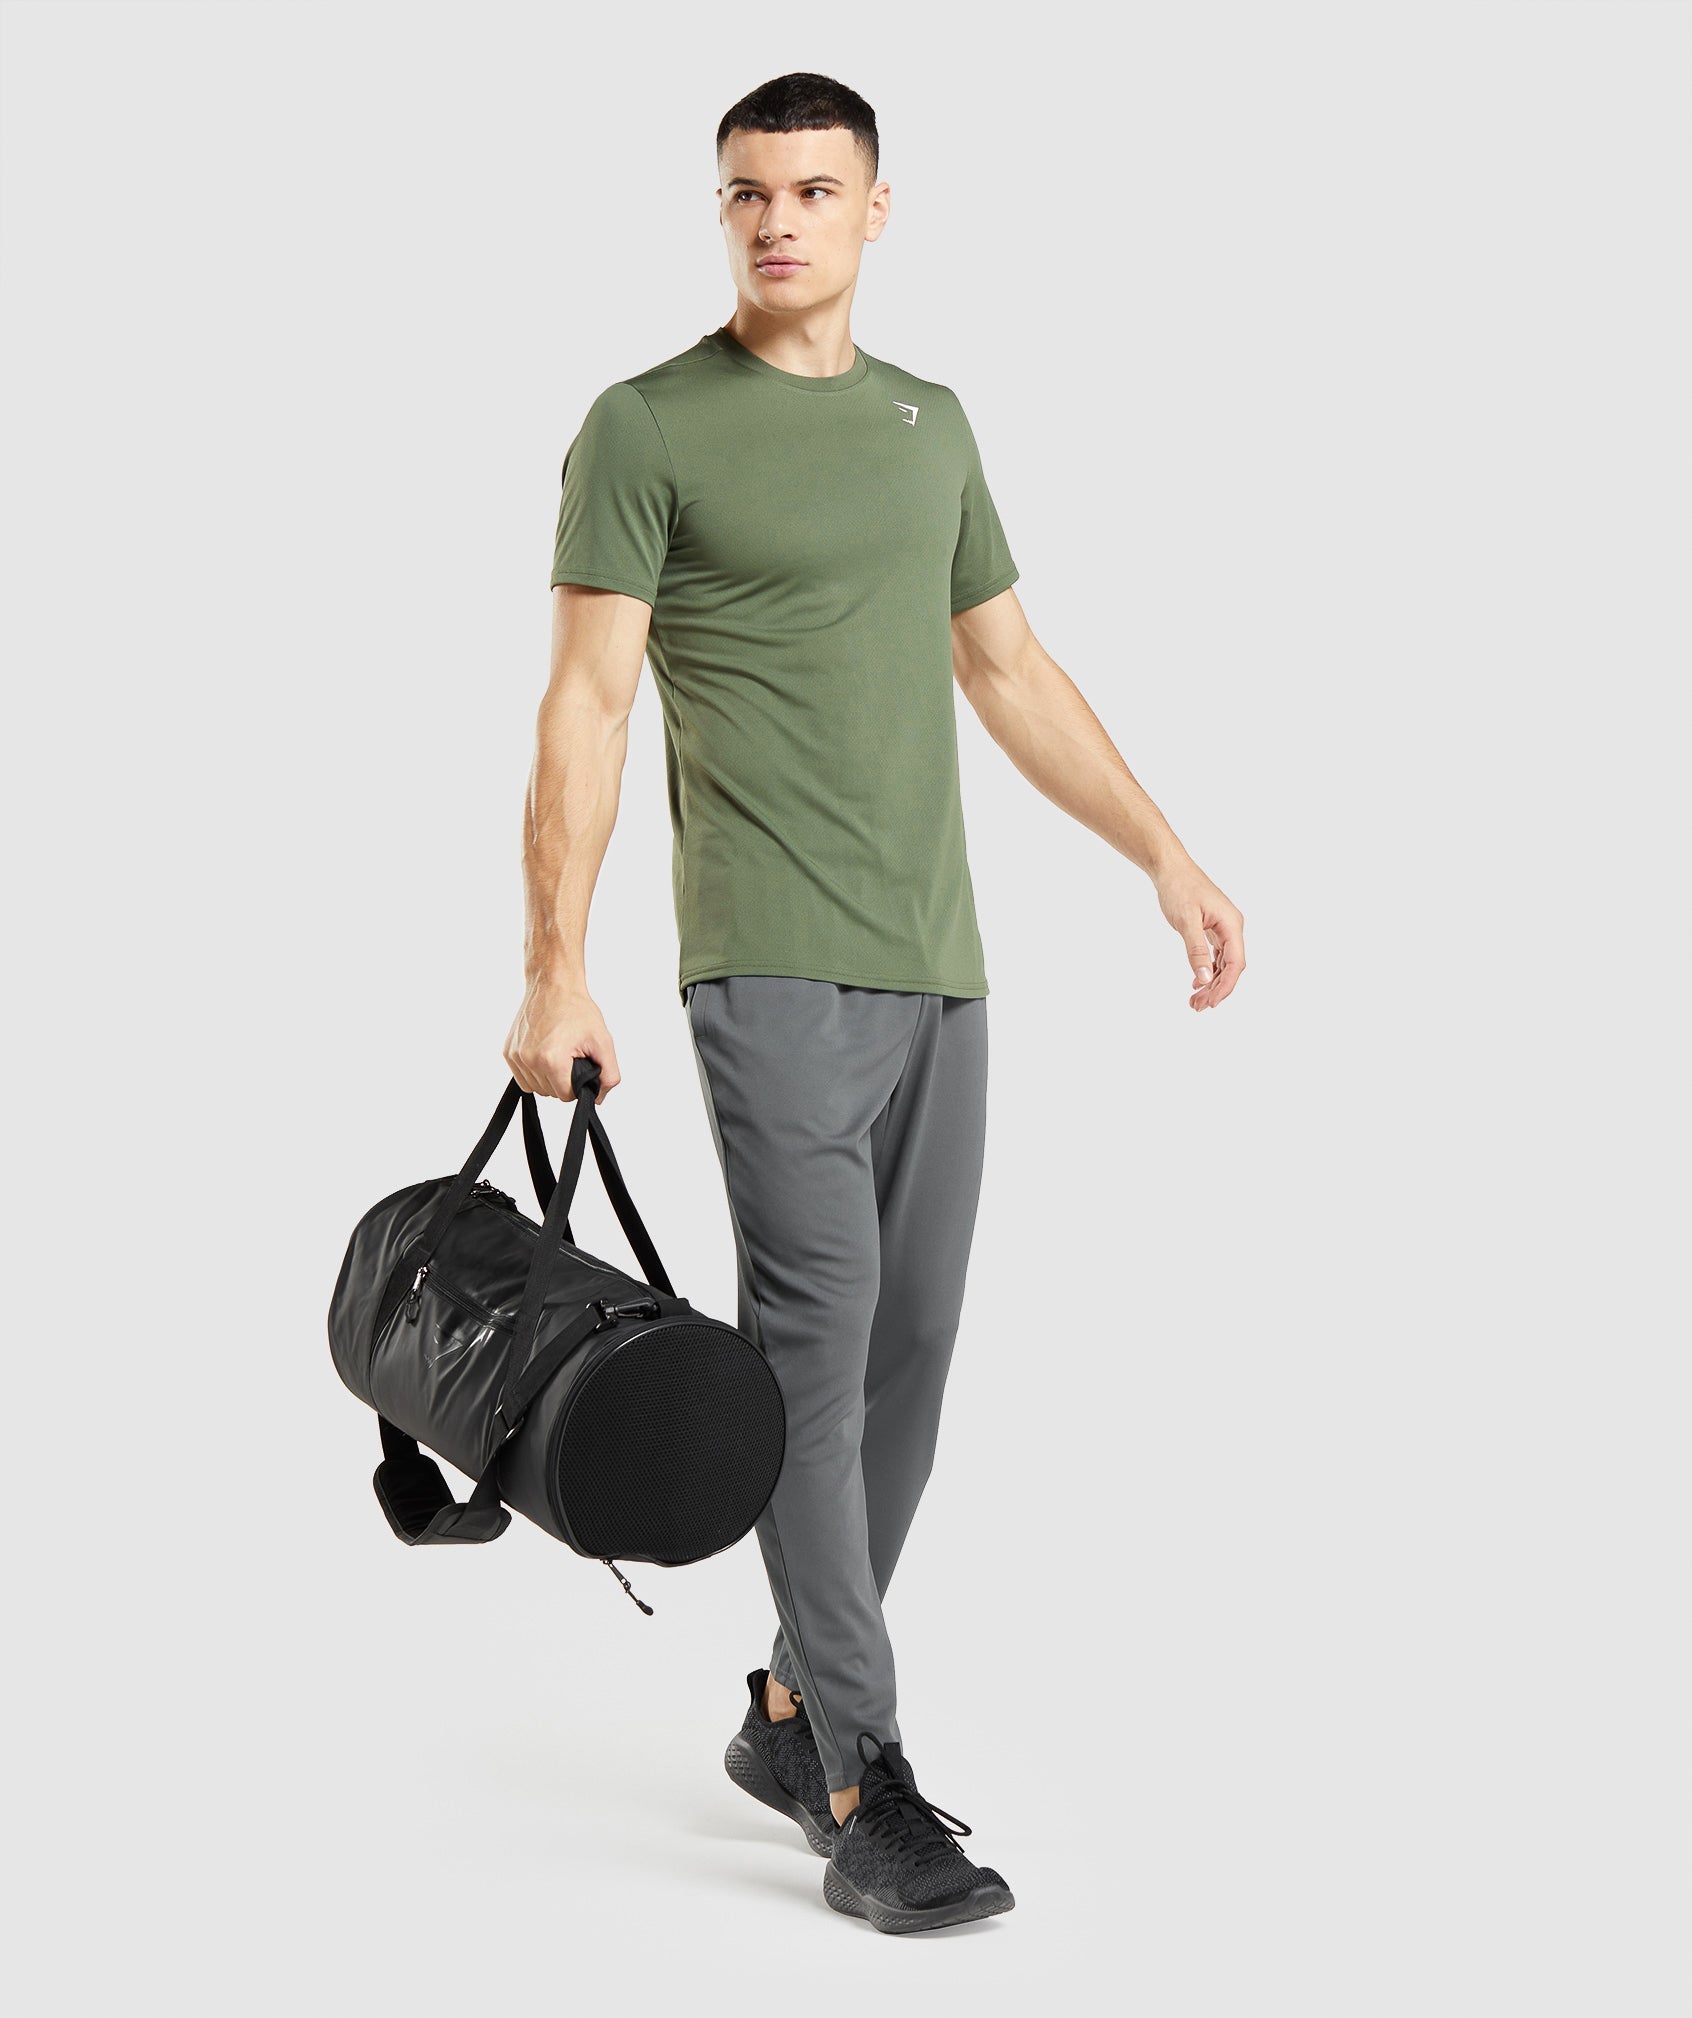 Arrival Knit Joggers in Charcoal Grey - view 4